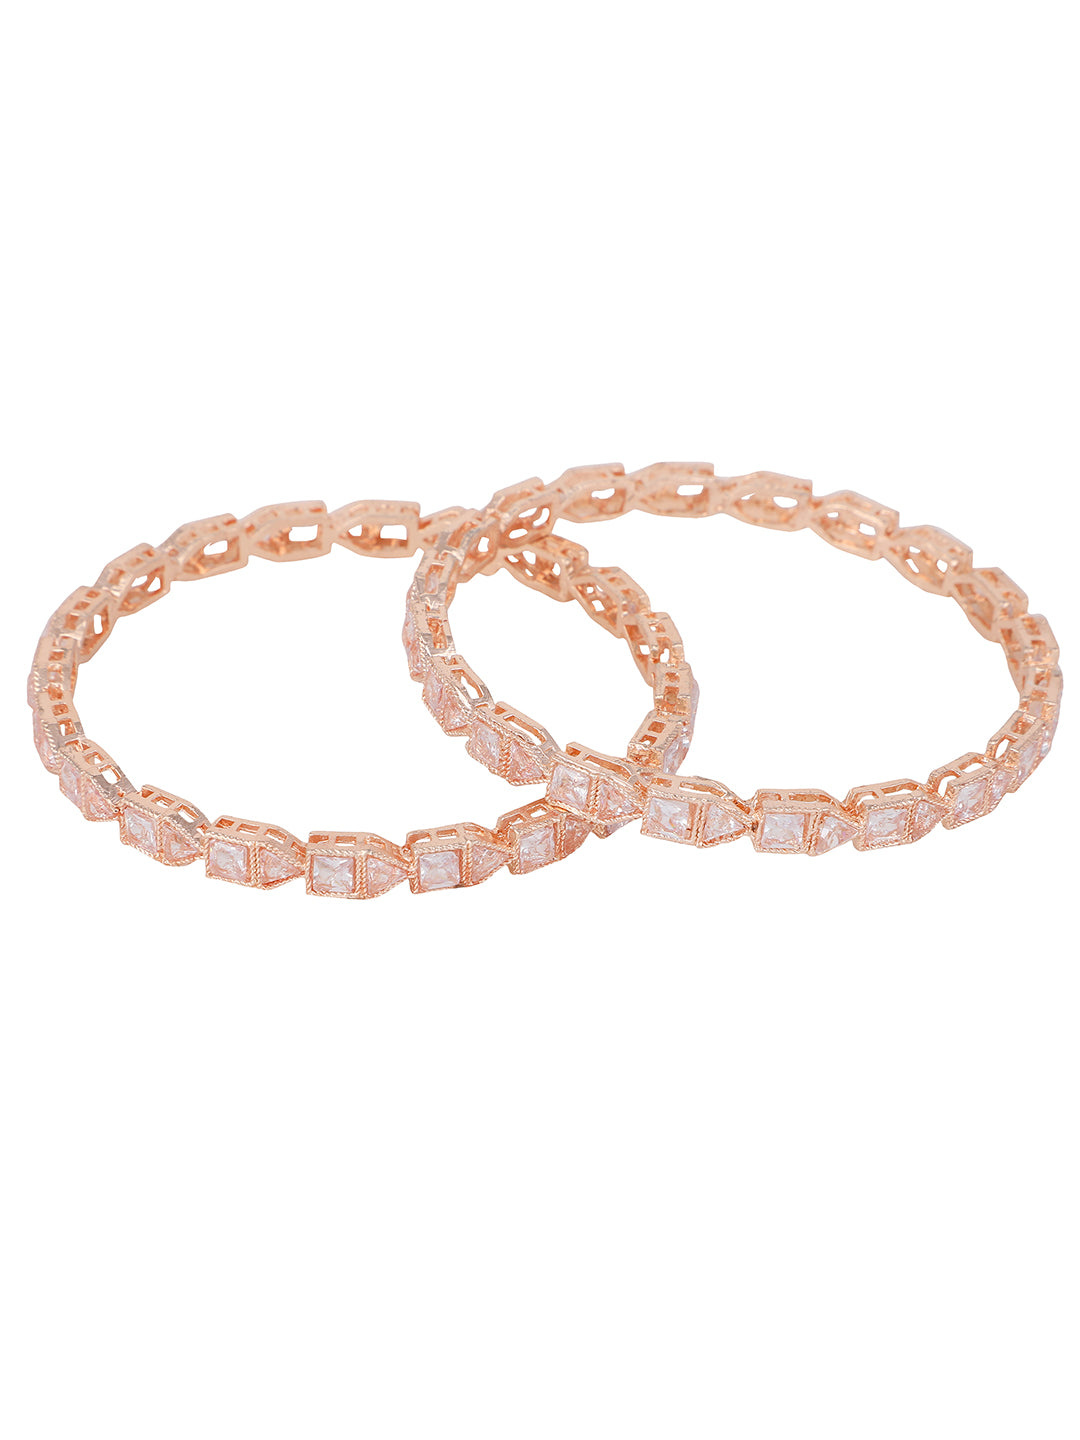 Women's Set Of 2 Rose Gold-Plated & White Ad-Studded Baguette Cut Bangles - Anikas Creation